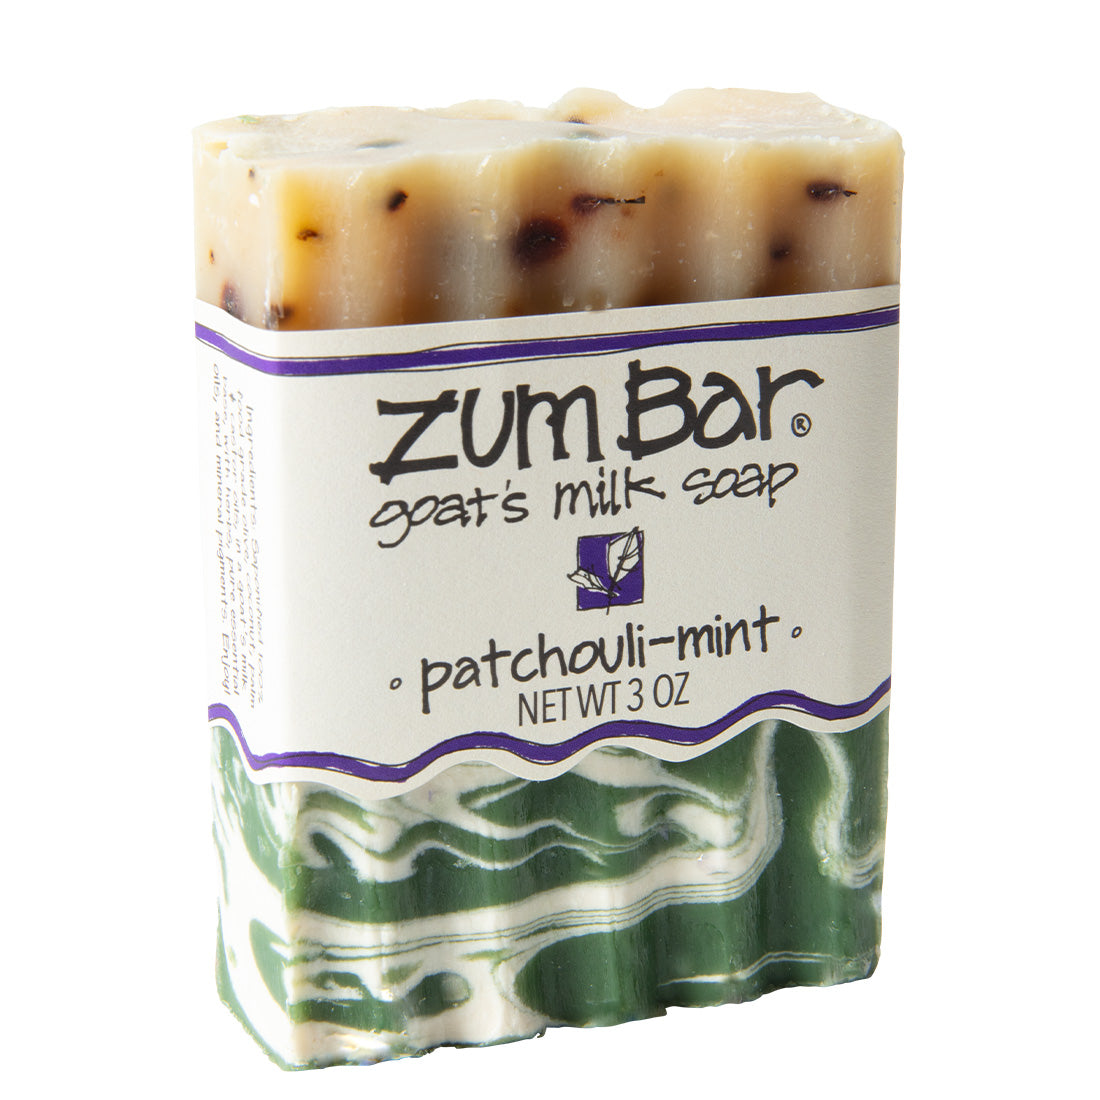 Labeled patchouli-mint scented Zum Bar Soap with white and green colored swirls and speckled brown coloring